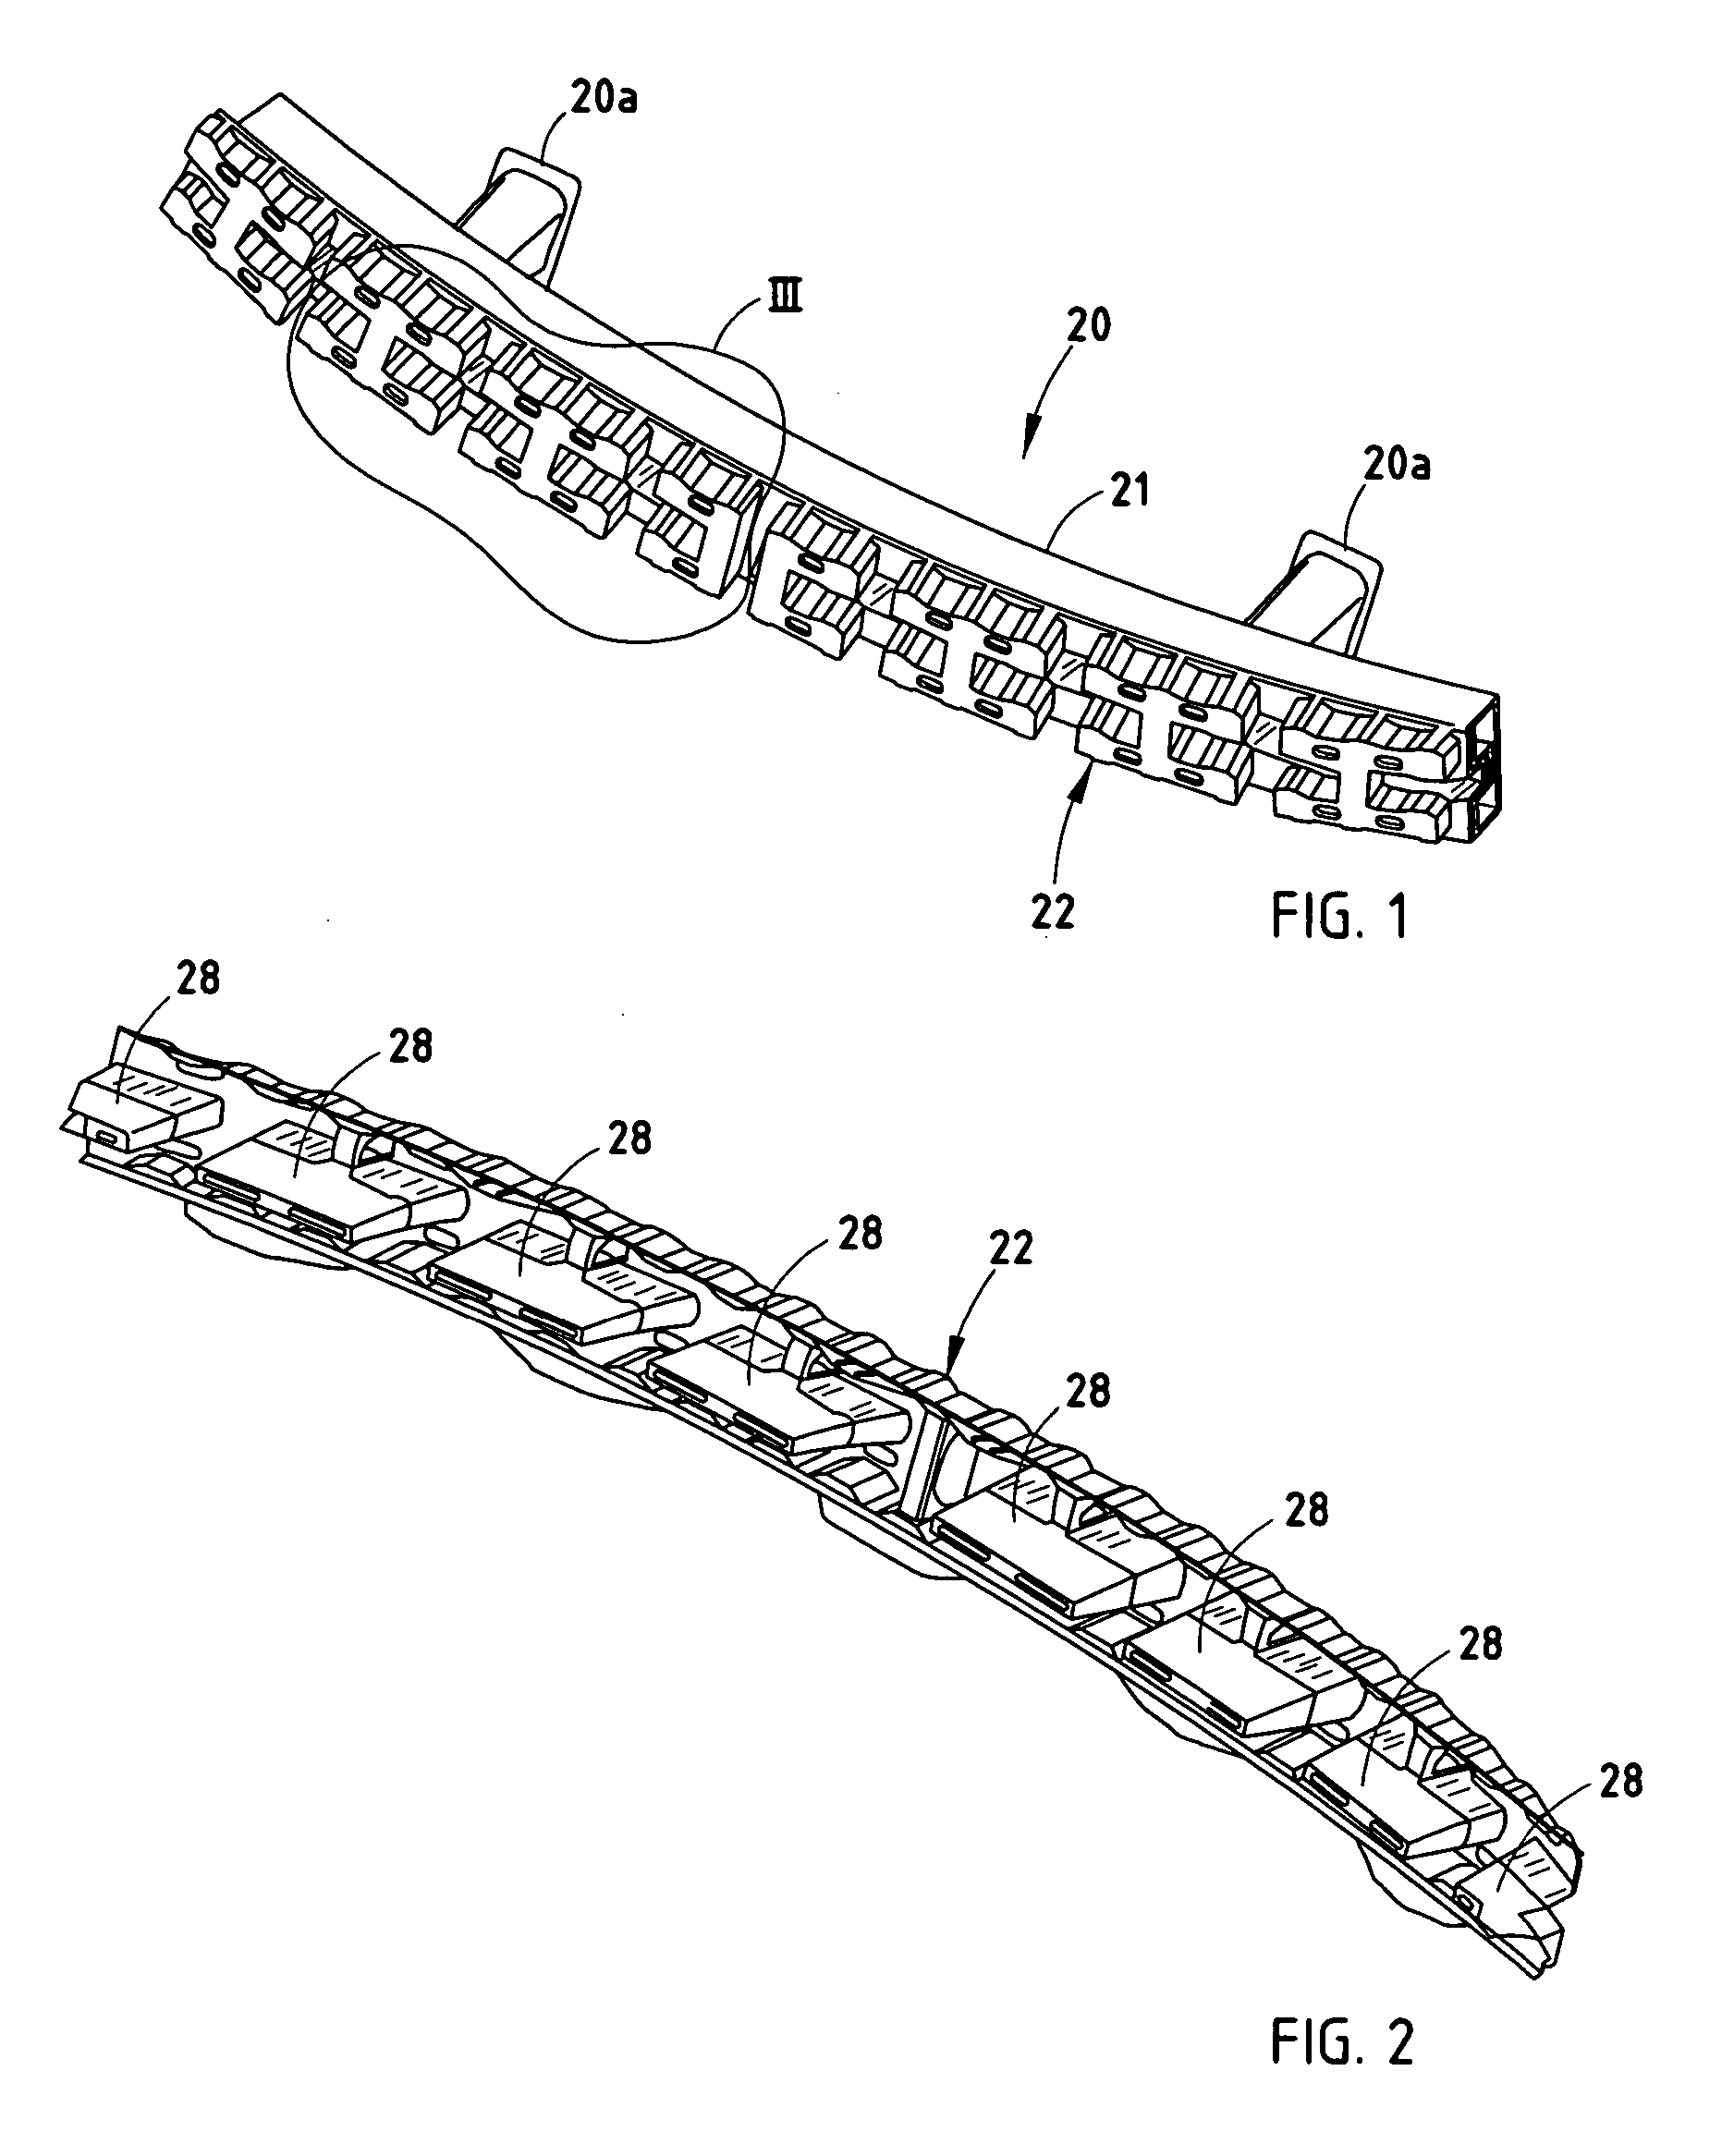 Bumper system with face-mounted energy absorber